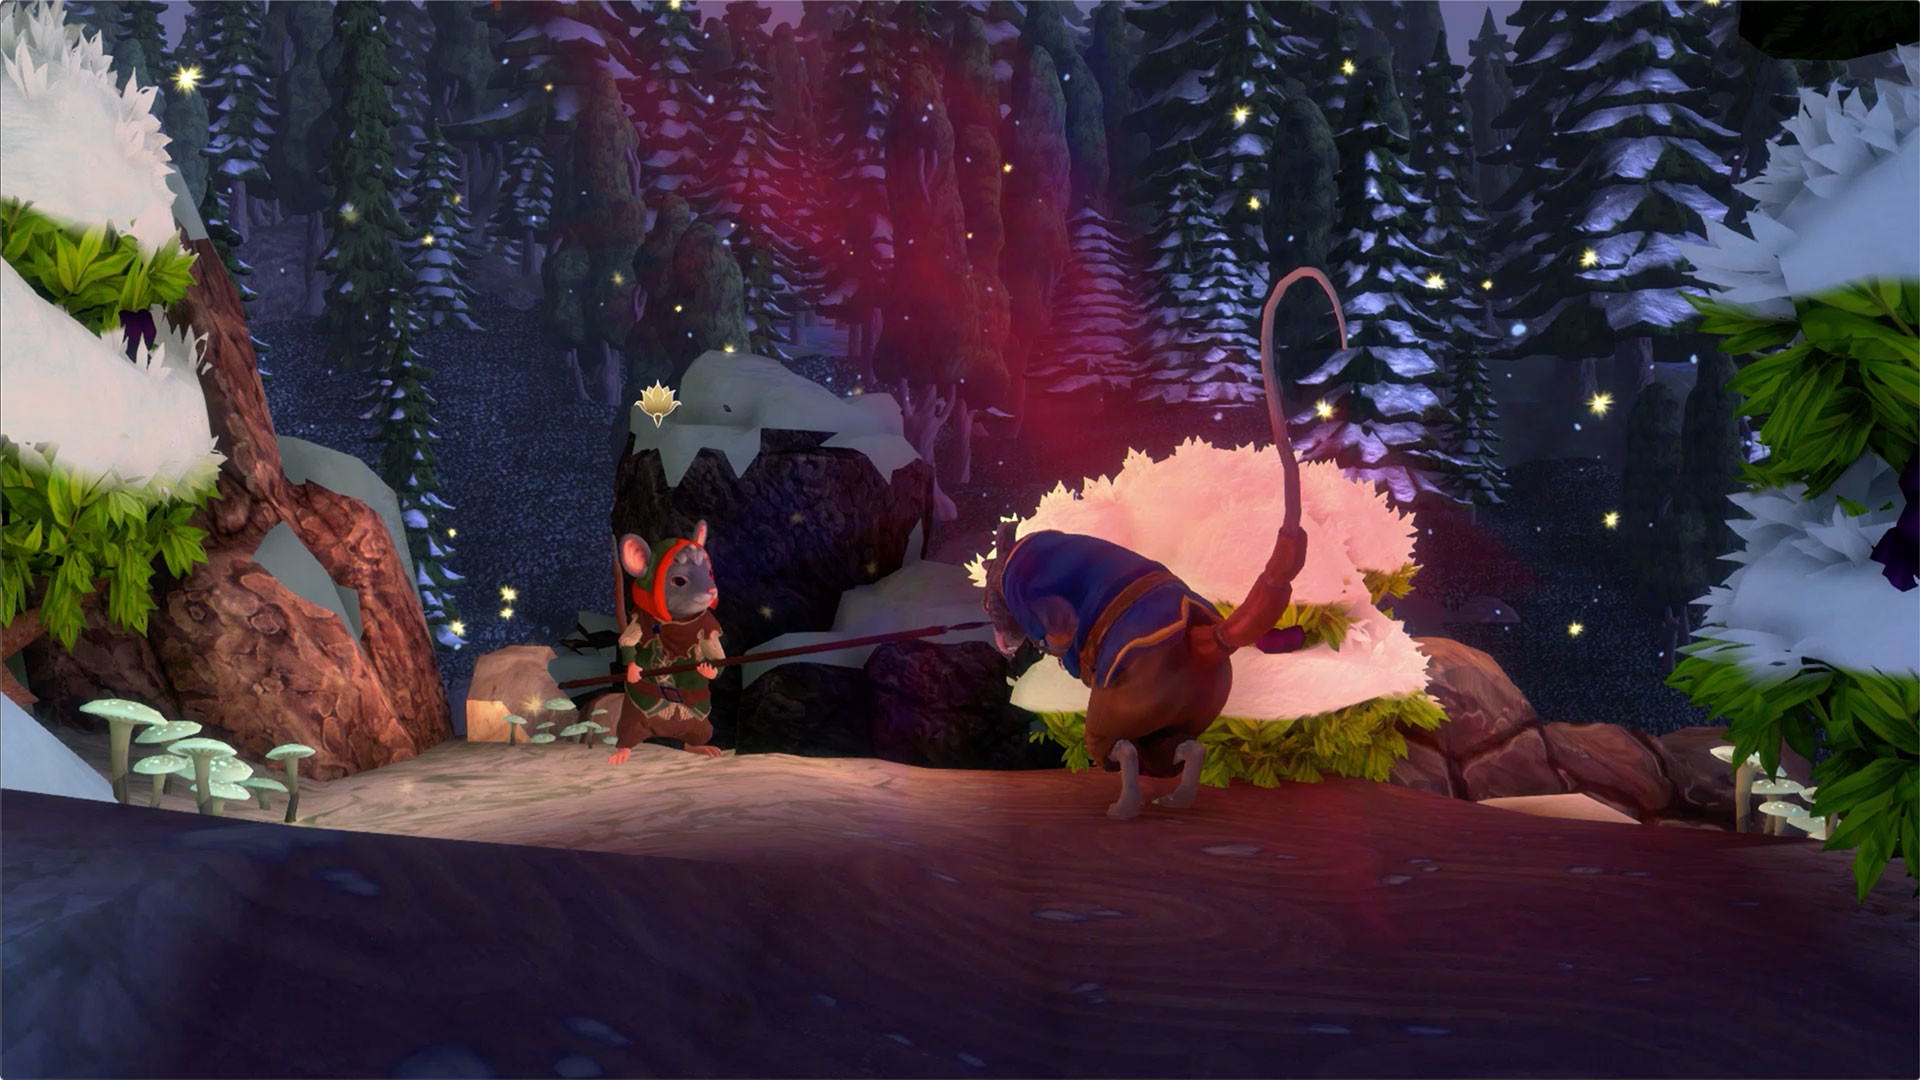 The Lost Legends of Redwall: The Scout Act II Playtest Featured Screenshot #1